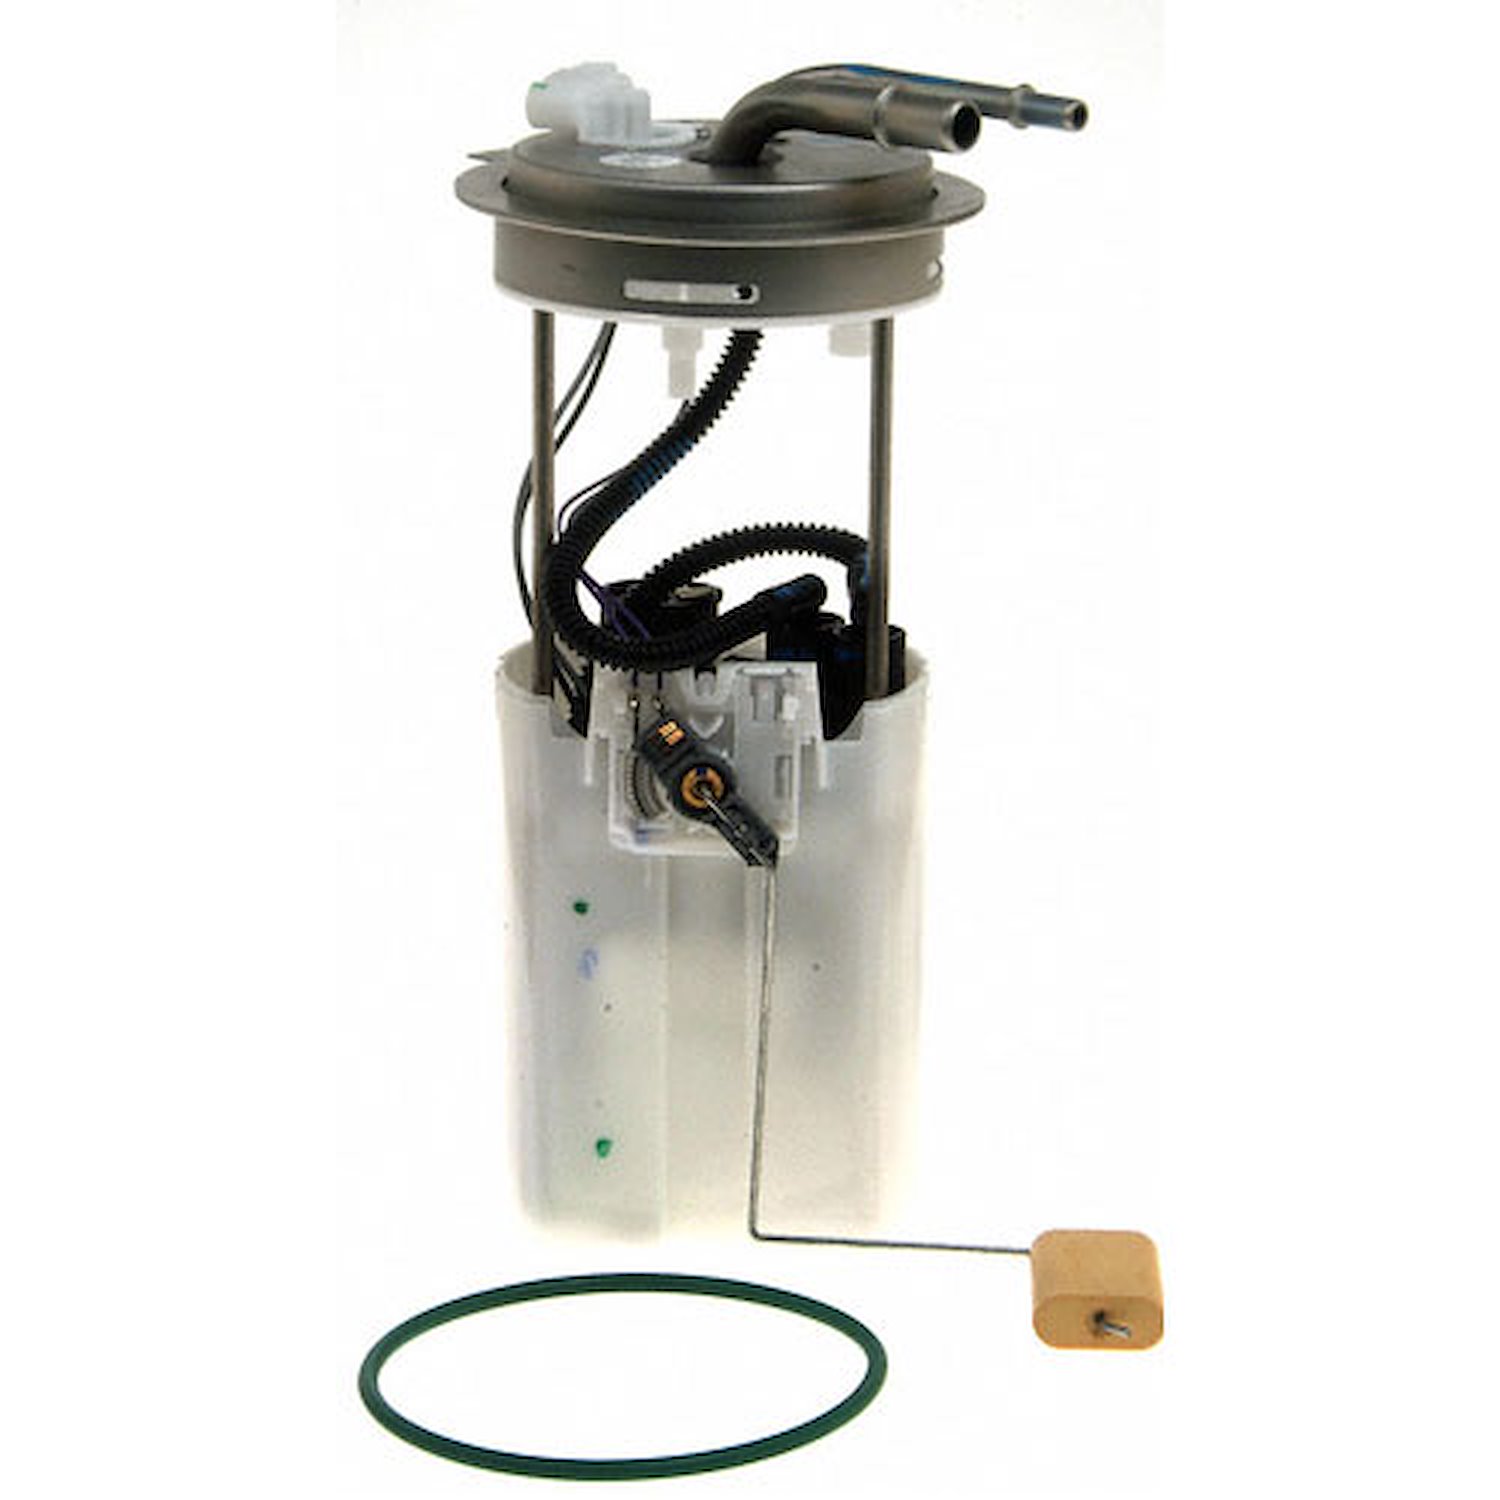 OE GM Replacement Electric Fuel Pump Module Assembly for 2004-2005 Chevrolet Express 3500 4.8L/6.0L V8 2004-05 GMC Savana 4.8L/6